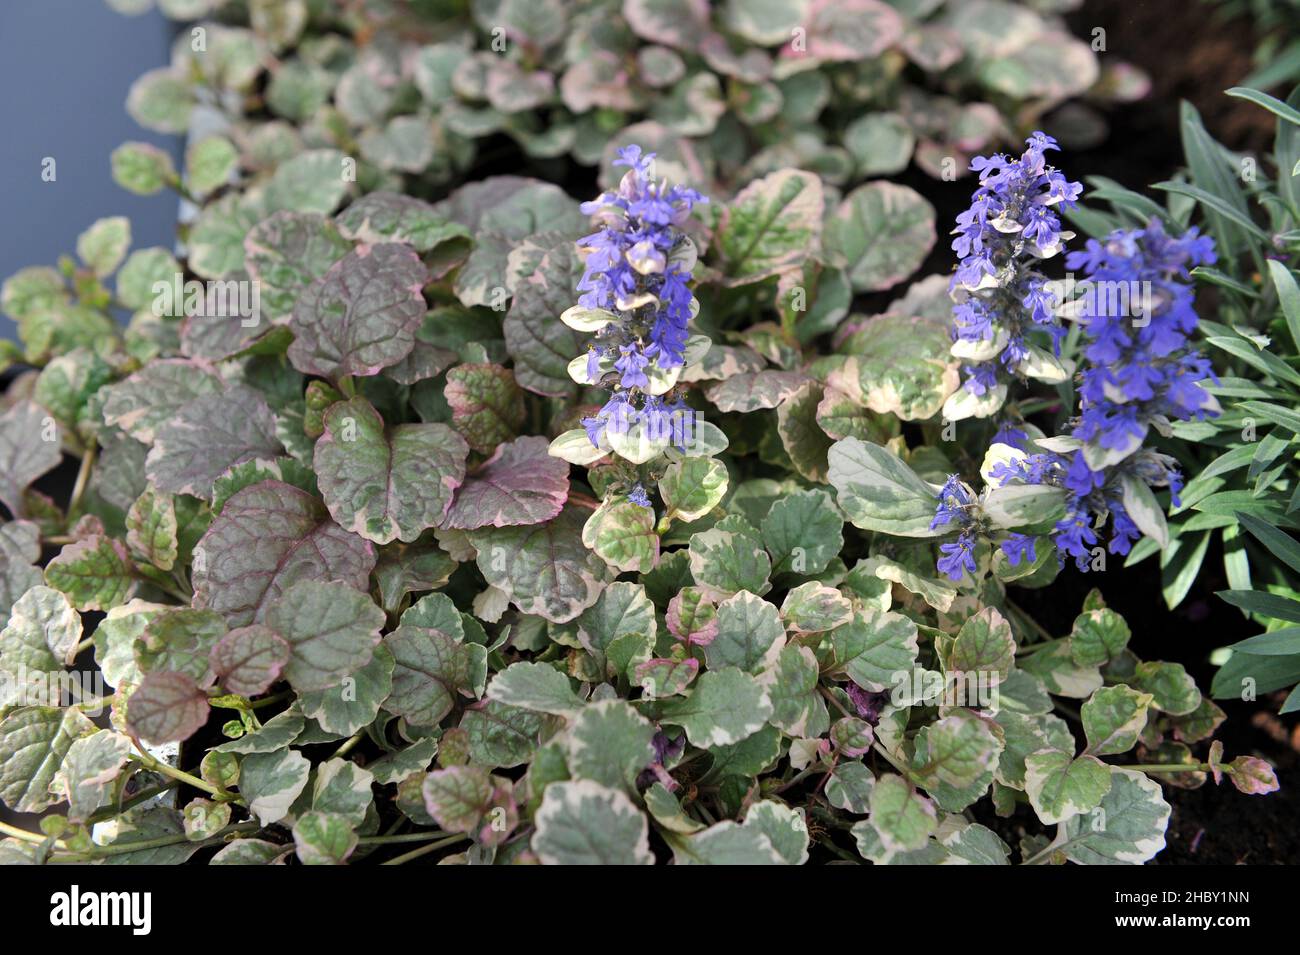 Bugle (Ajuga reptans) Variegata with variegated foliage blooms in a garden in April Stock Photo